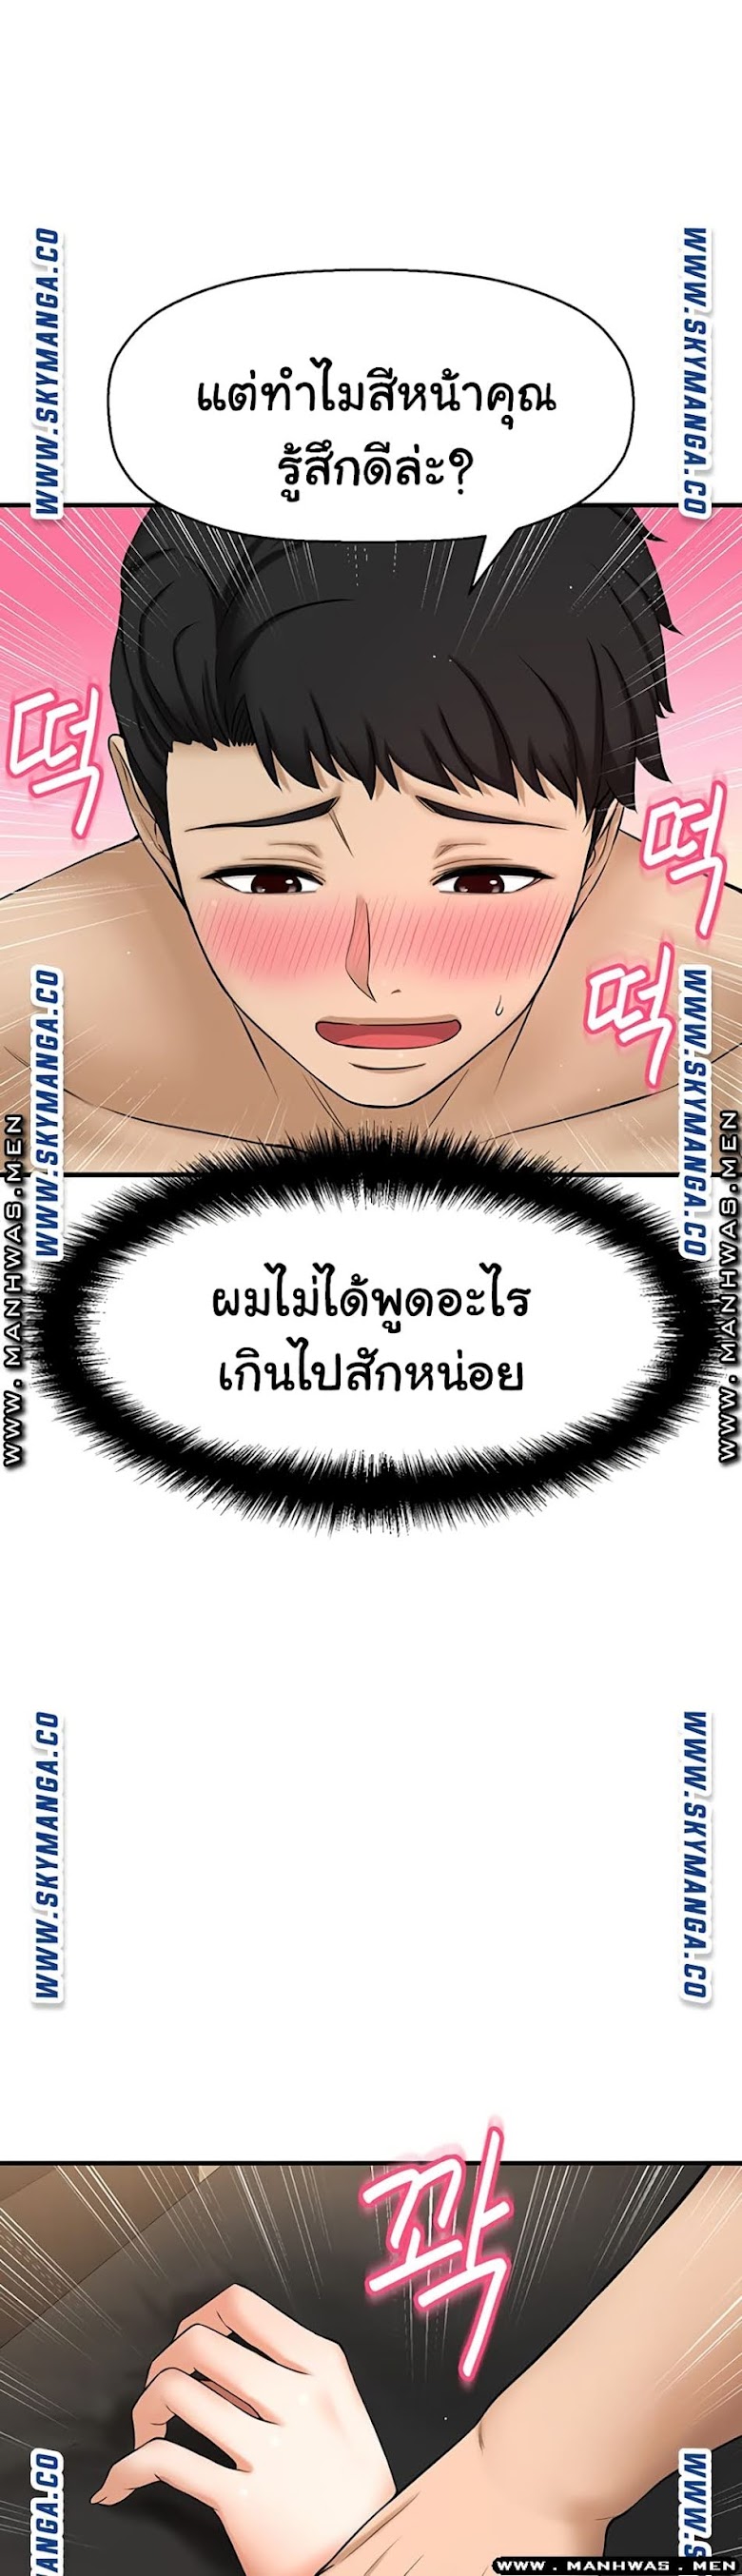 I Want to Know Her - หน้า 21